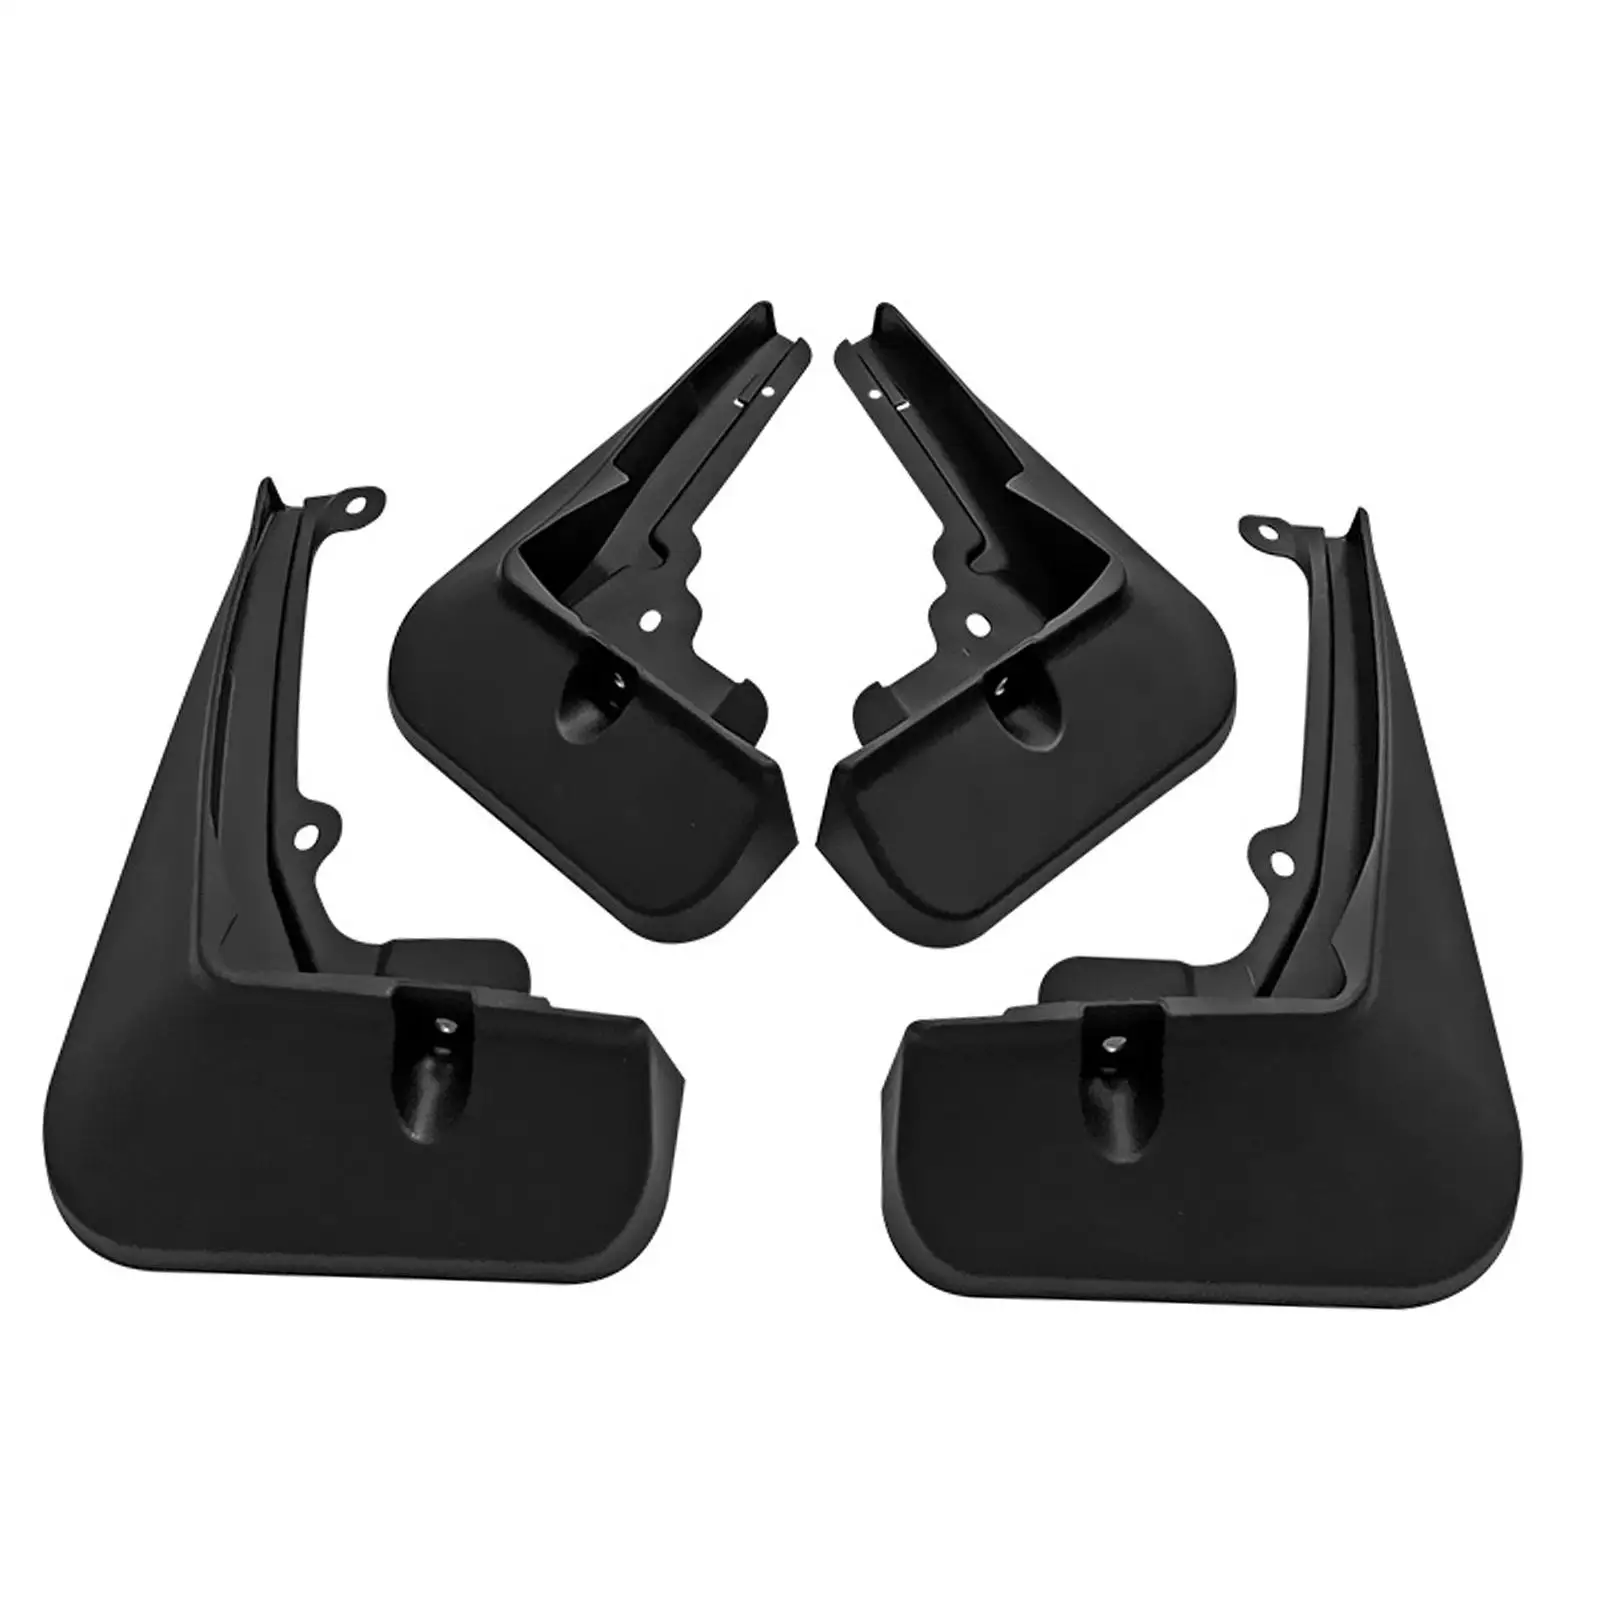 4x Car Mudguard Front Rear Muds Guard Flap Fenders for Byd Seal 2022